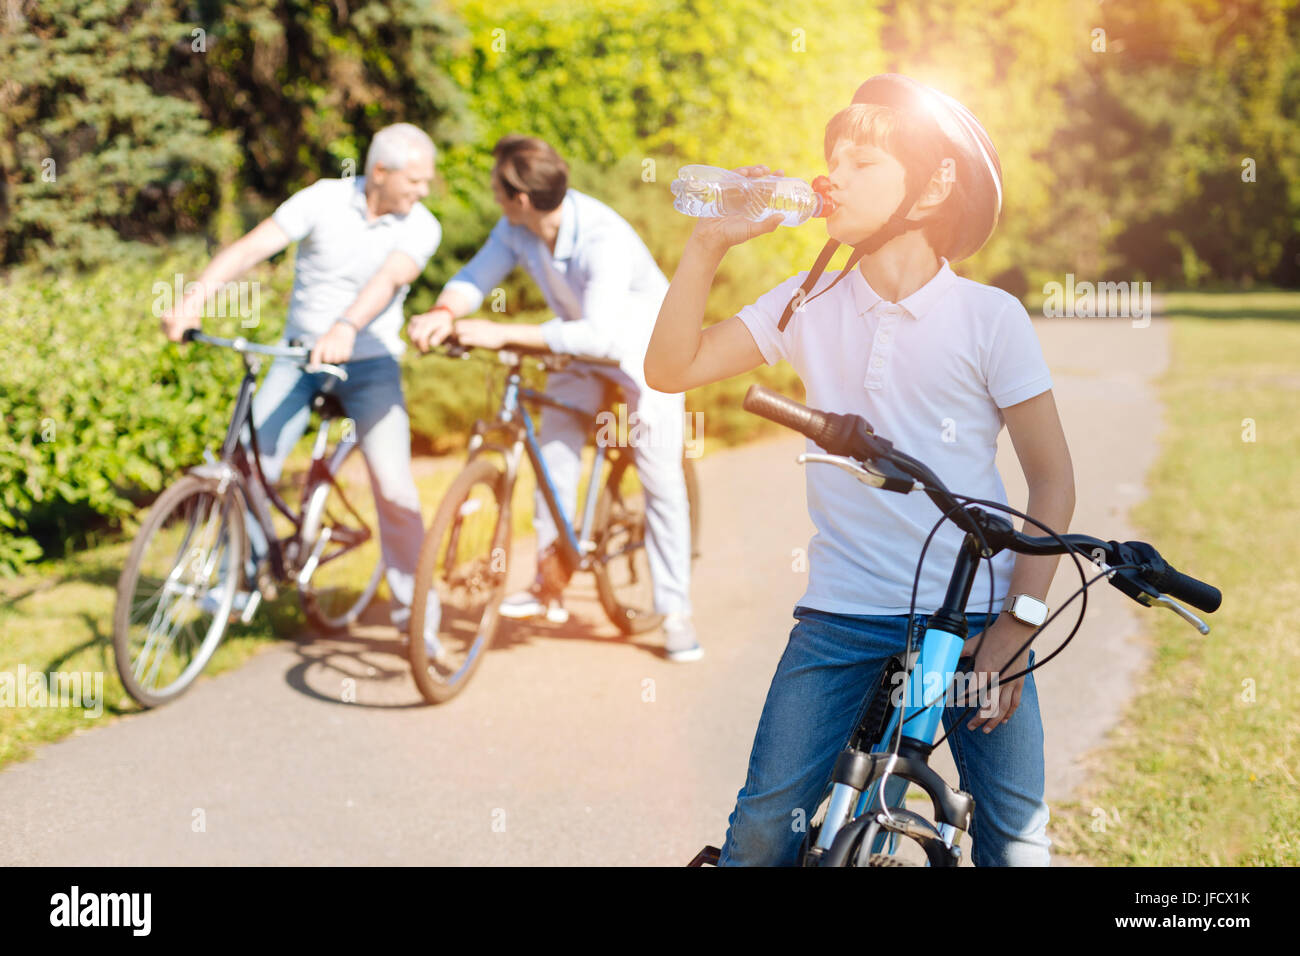 Thirst for adventure. Inspired diligent bright kid exercising with his family while riding bicycles and feeling thirsty Stock Photo